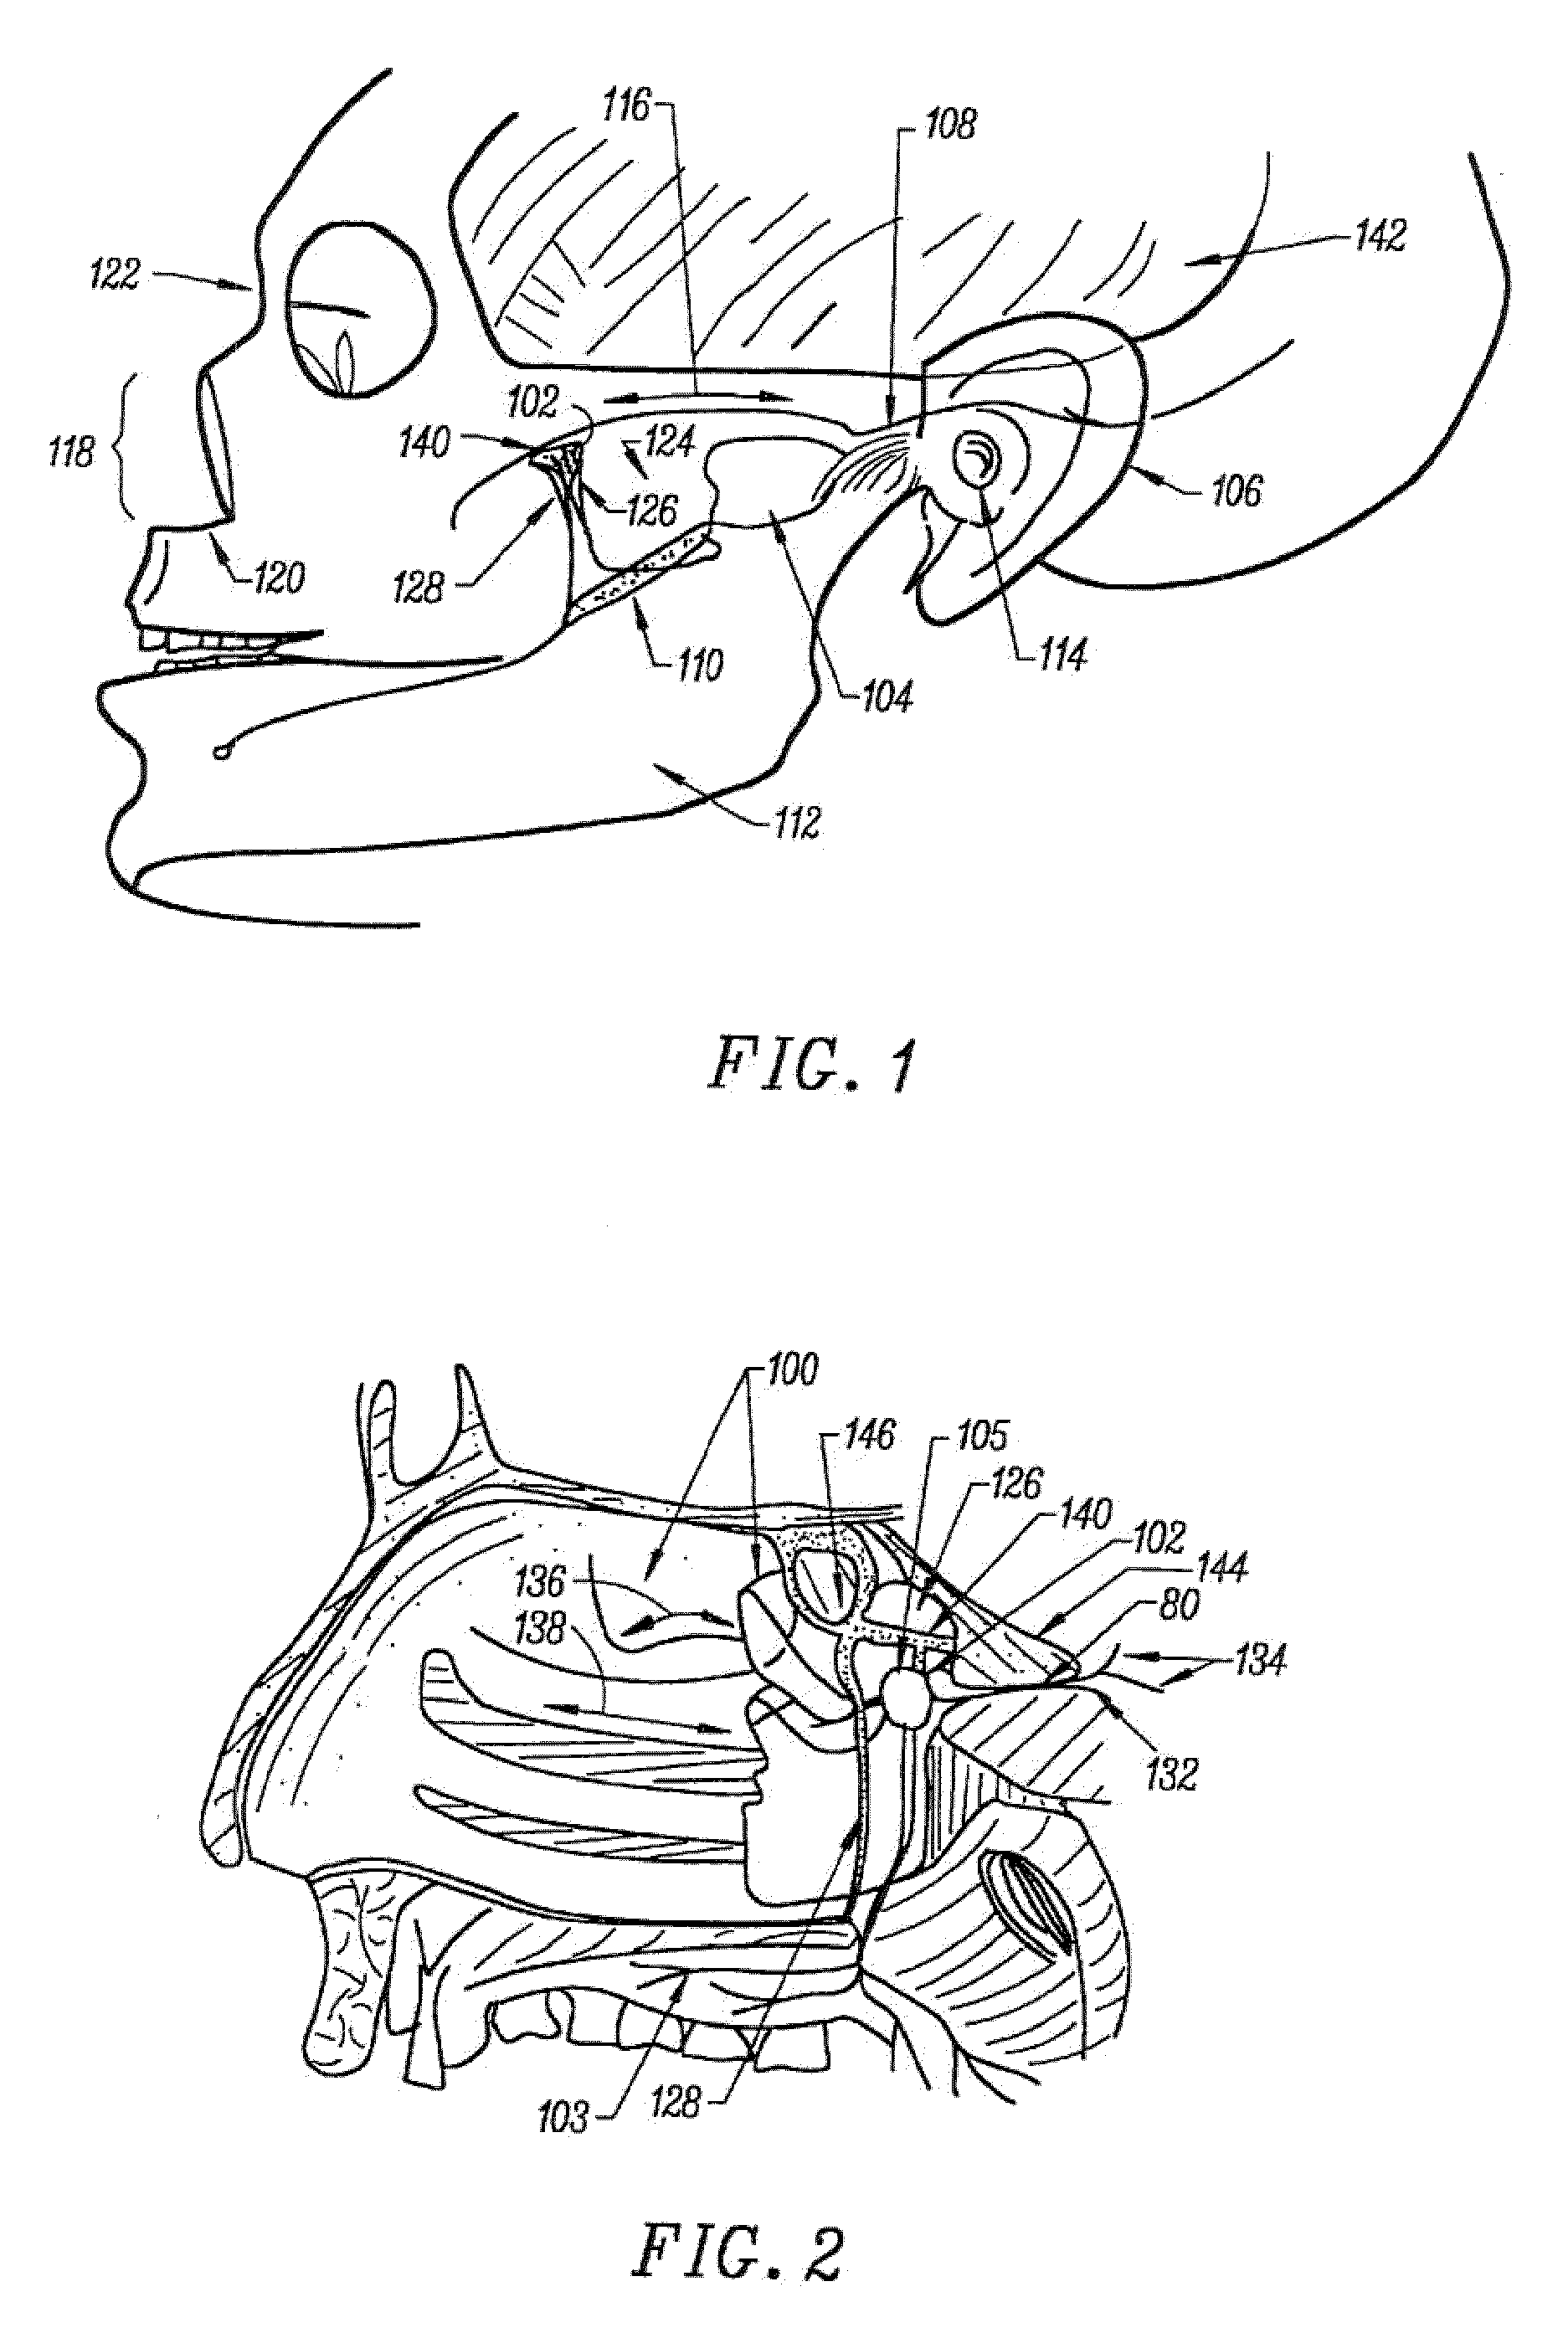 Stimulation method for the sphenopalatine ganglia, sphenopalatine nerve, or vidian nerve for treatment of medical conditions